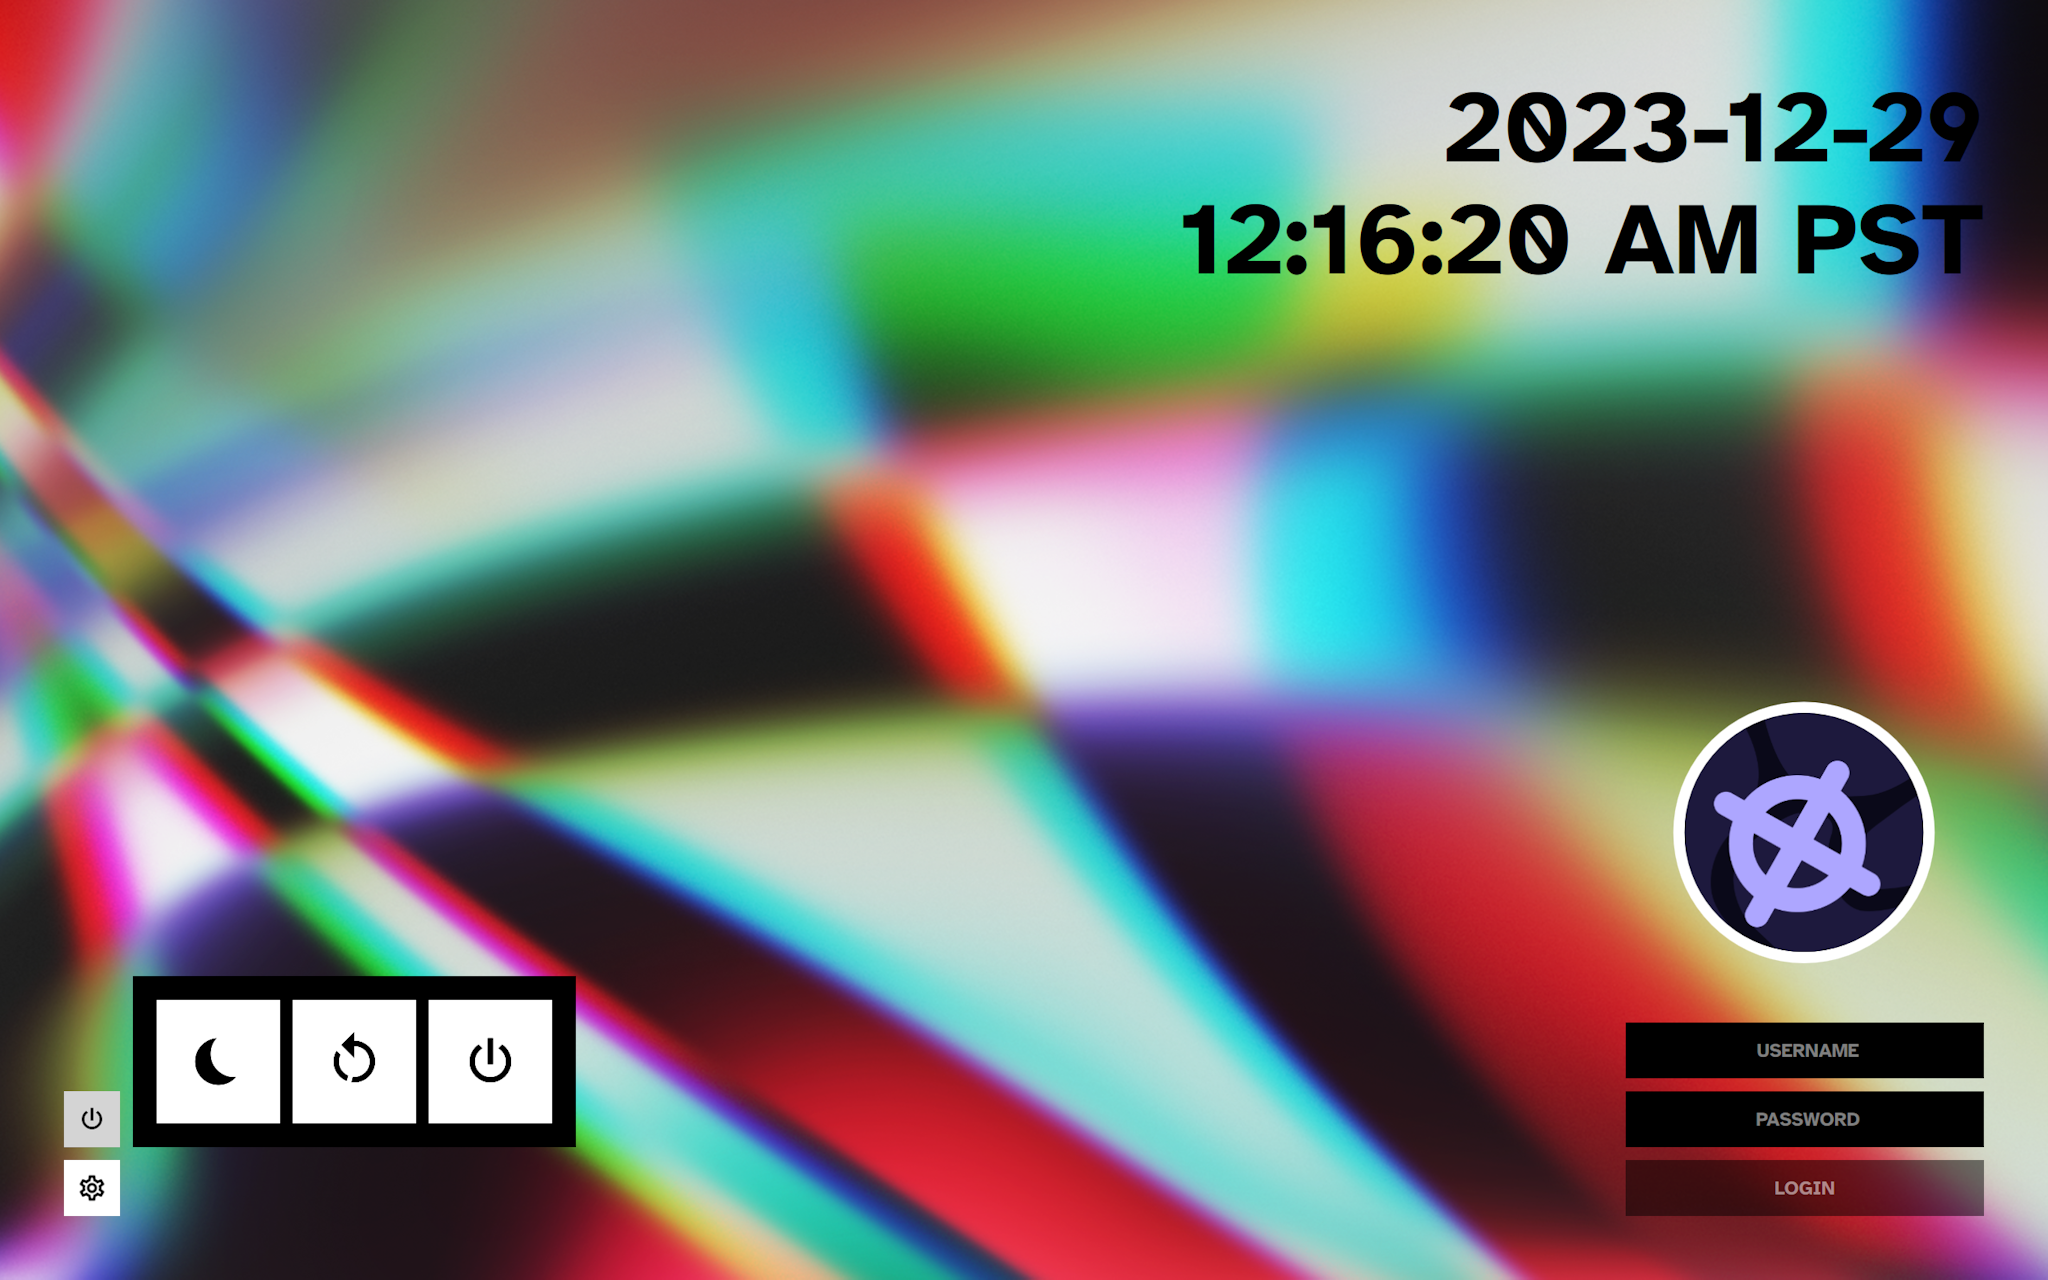 A very colorful background with black and white UI elements and squared corners.